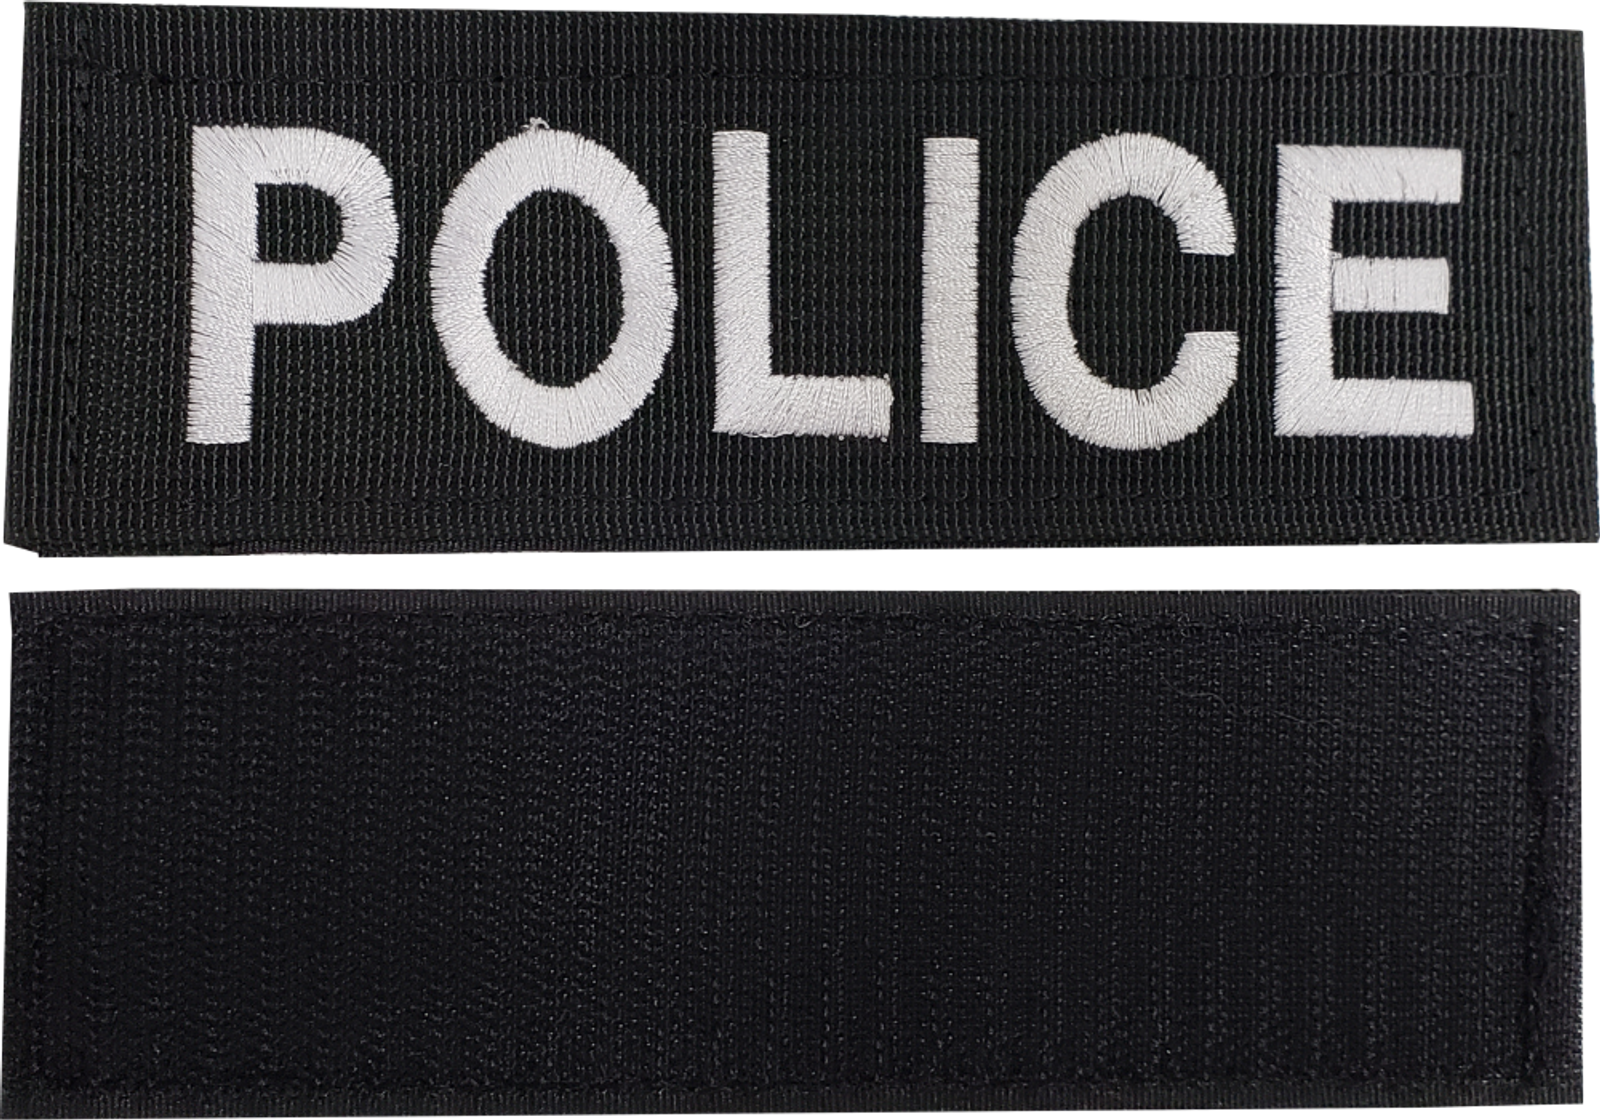 Embroidered Sheriff Patch, White Letters on Black Background